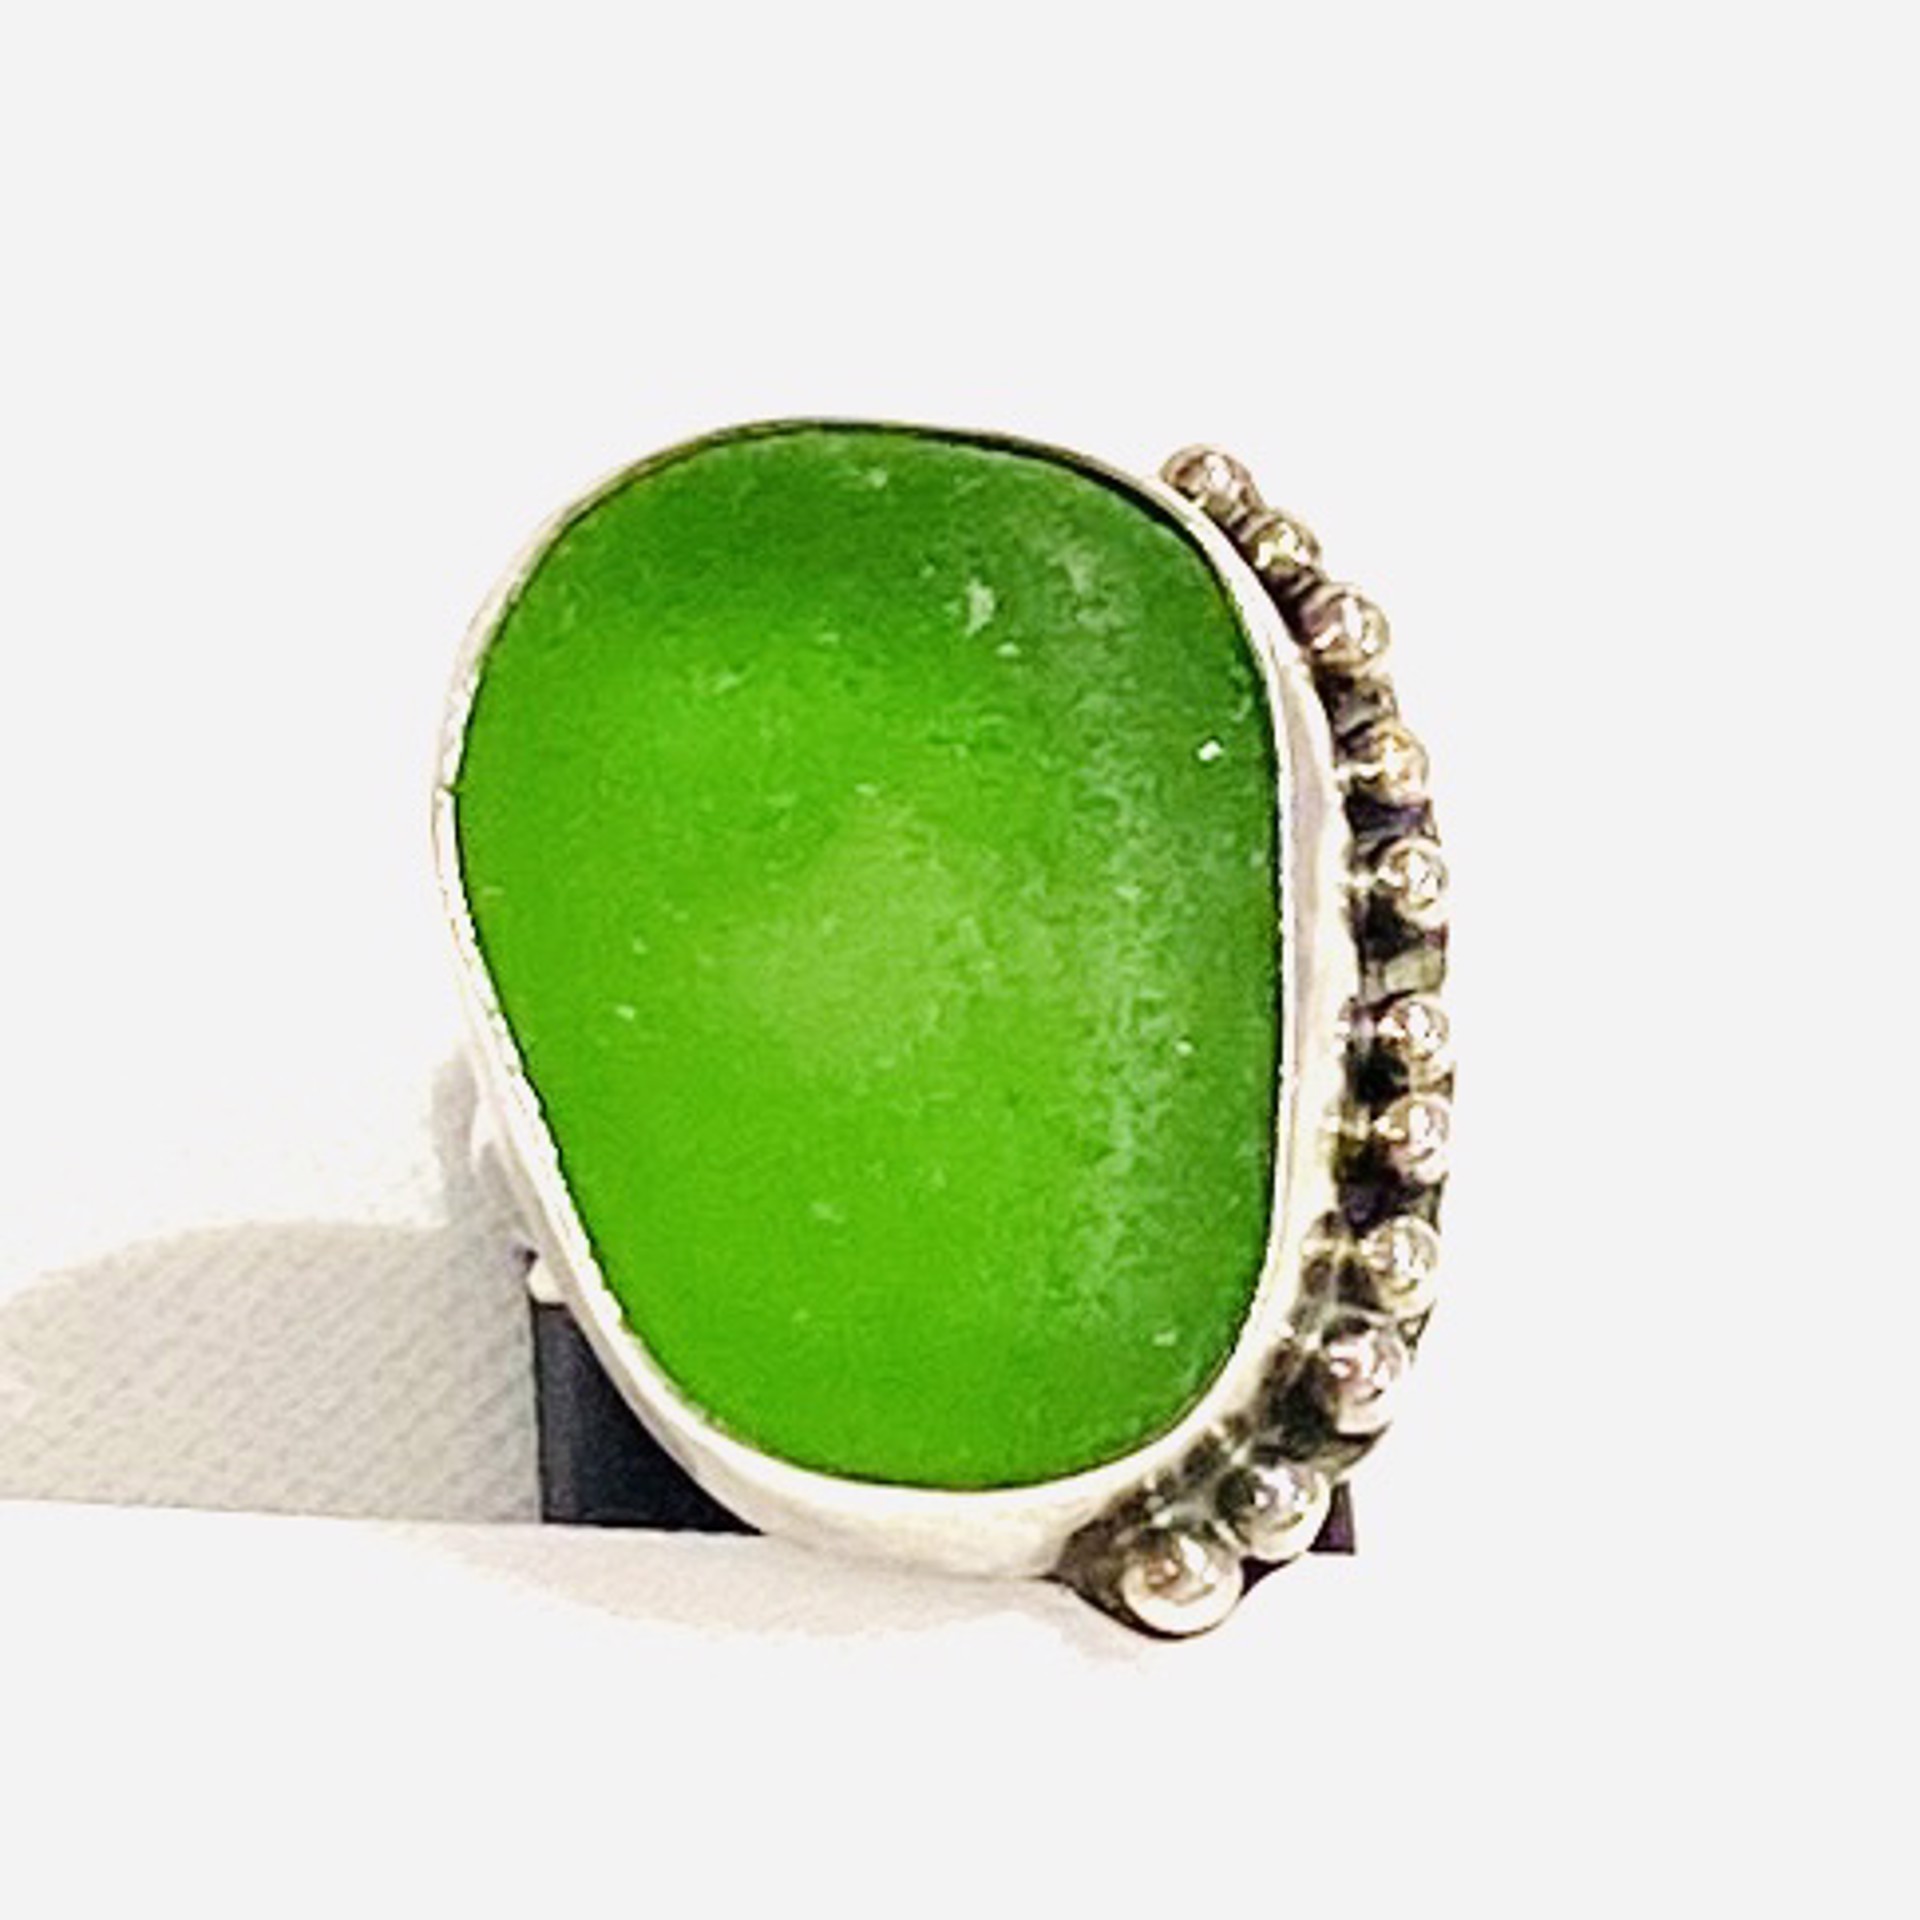 Green Sea Glass with Fish Cut Out Silver Ring, sz 6 by Anne Bivens